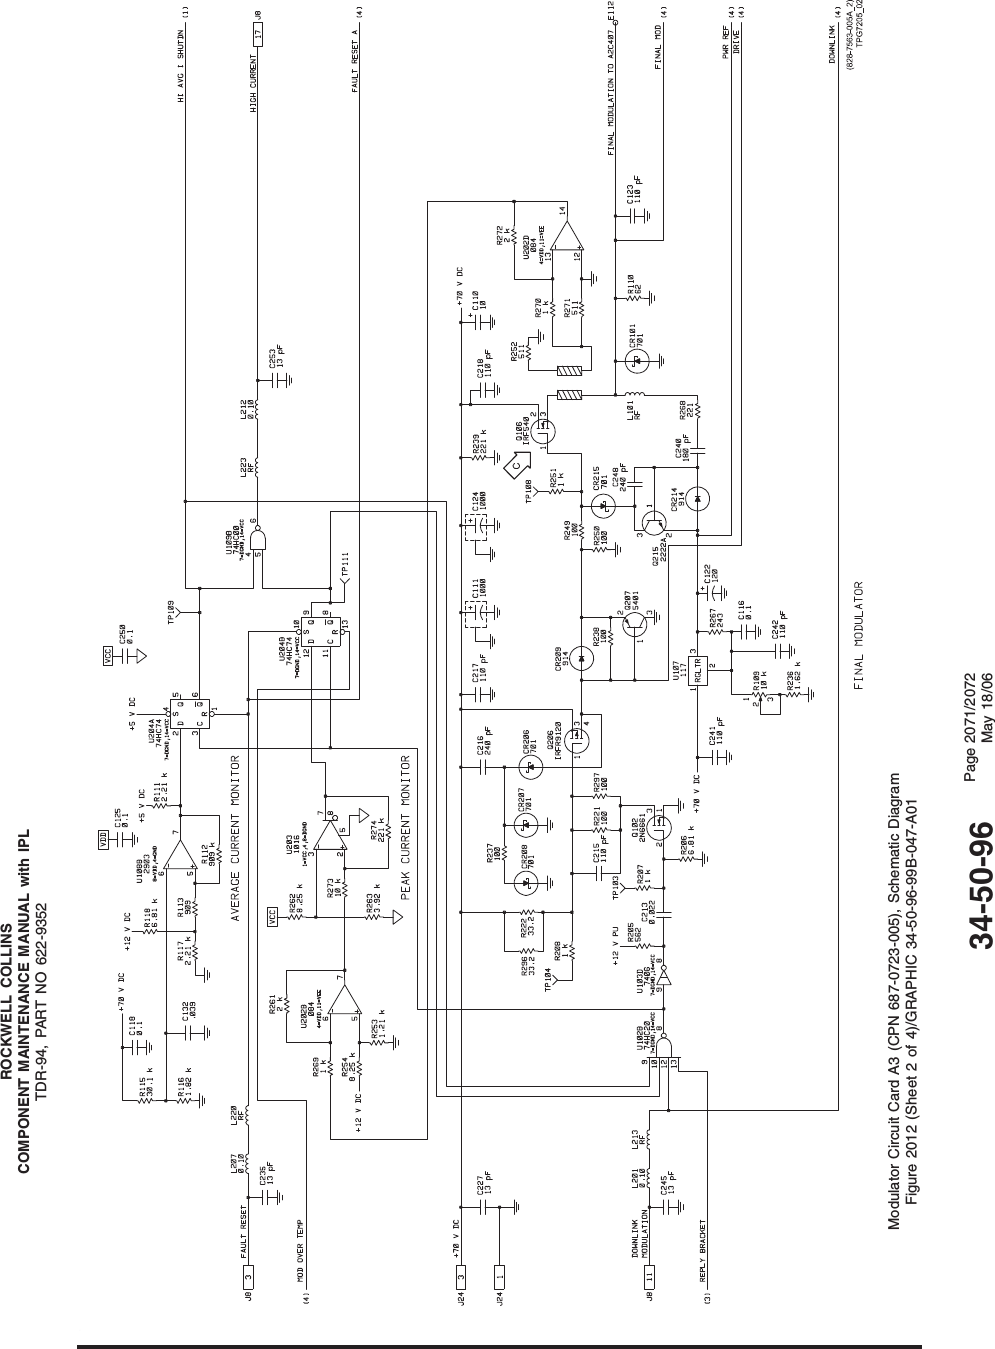 ROCKWELL COLLINSCOMPONENT MAINTENANCE MANUAL with IPLTDR-94, PART NO 622-9352Modulator Circuit Card A3 (CPN 687-0723-005), Schematic DiagramFigure 2012 (Sheet 2 of 4)/GRAPHIC 34-50-96-99B-047-A0134-50-96 Page 2071/2072May 18/06